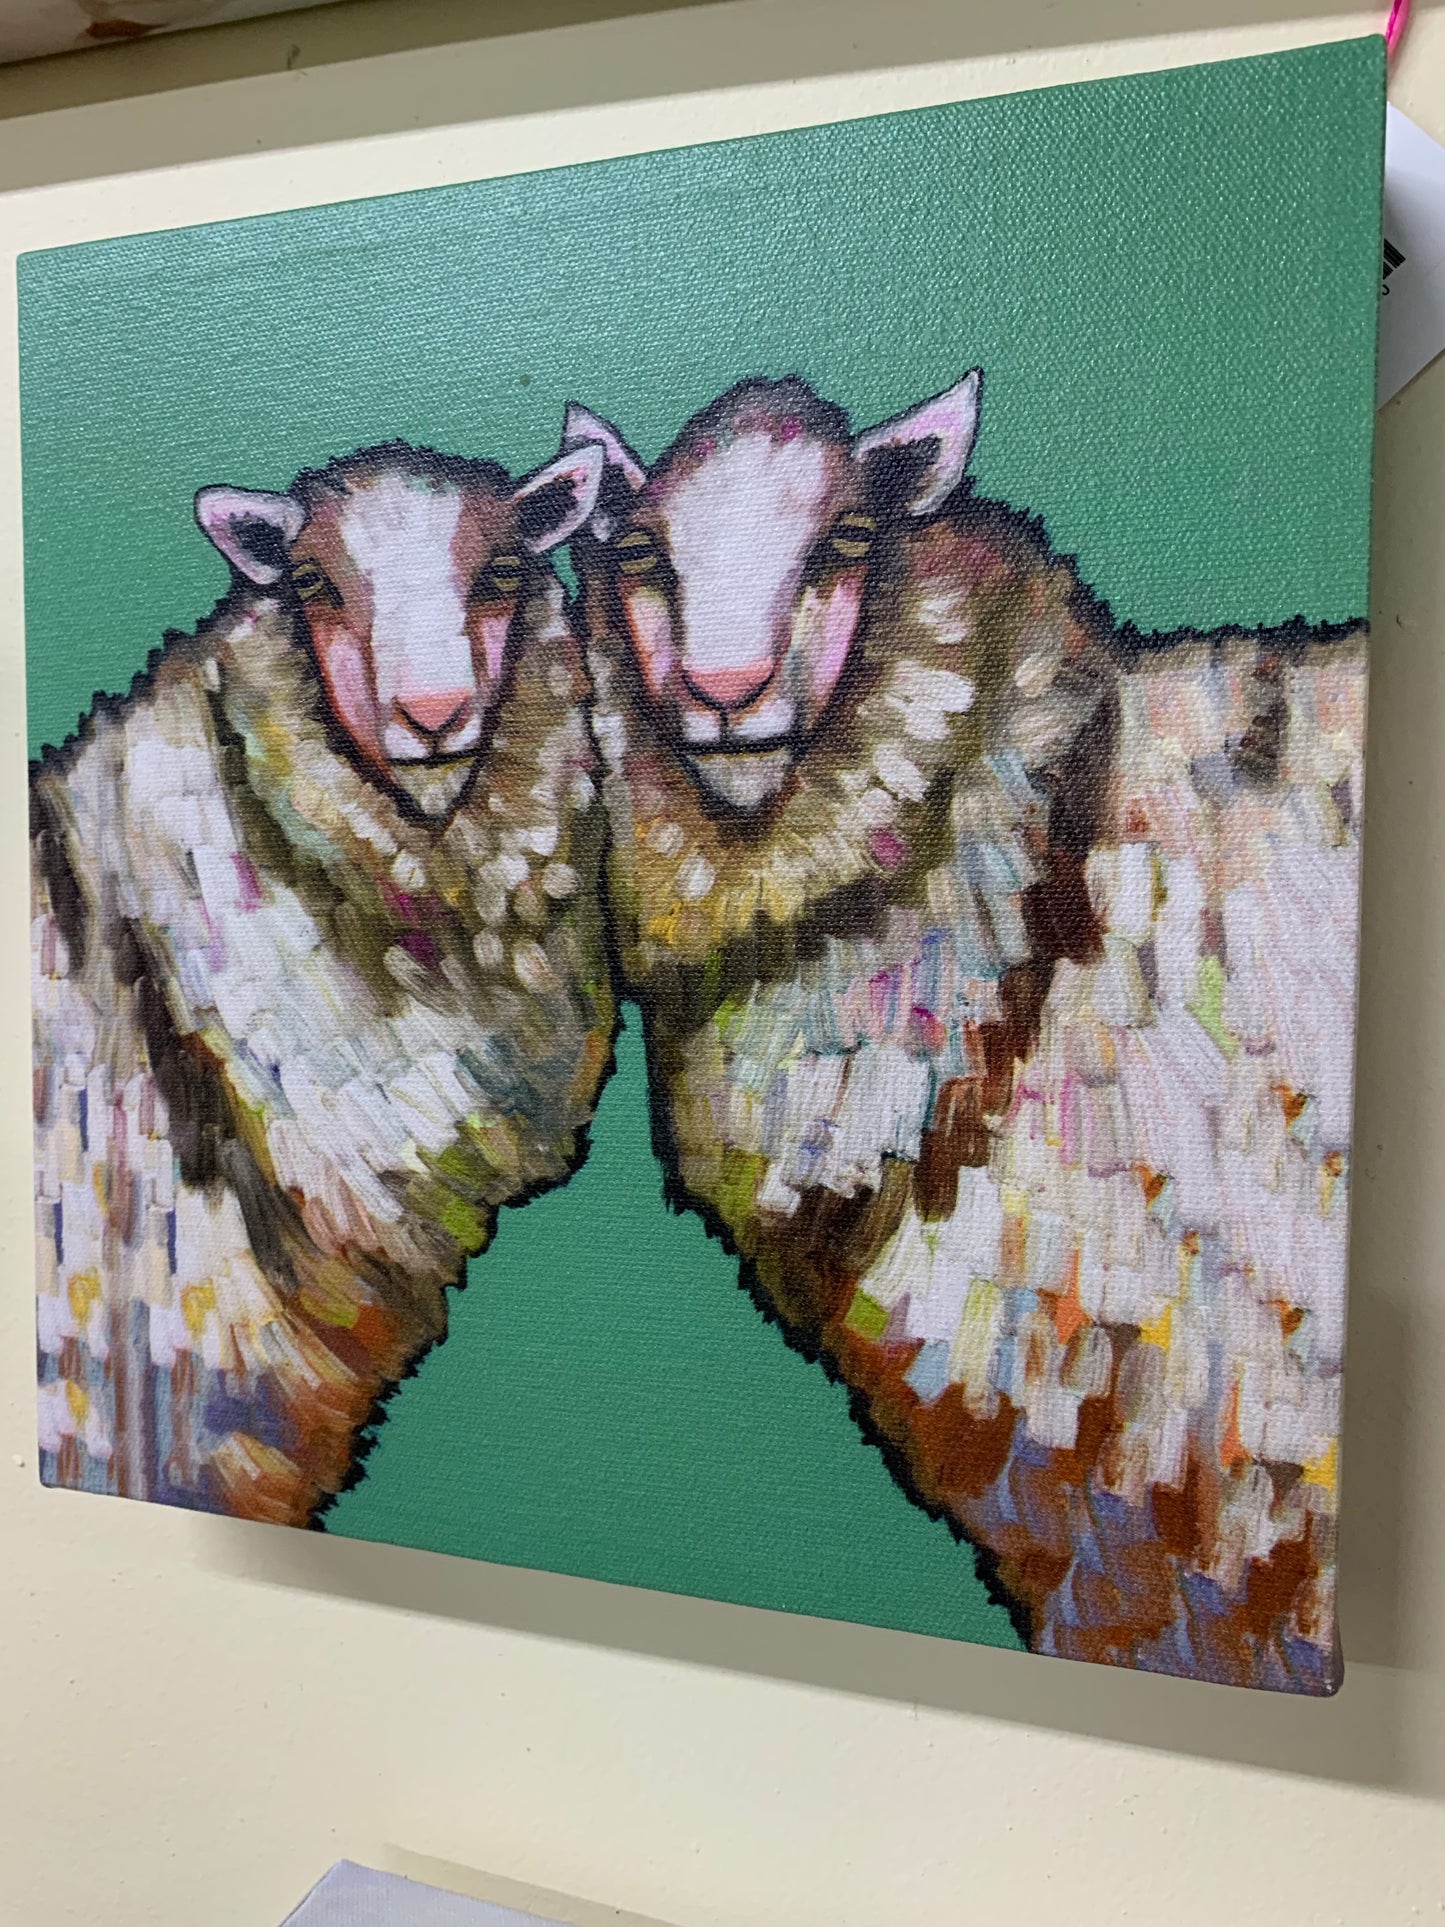 SHEEP ON CANVAS